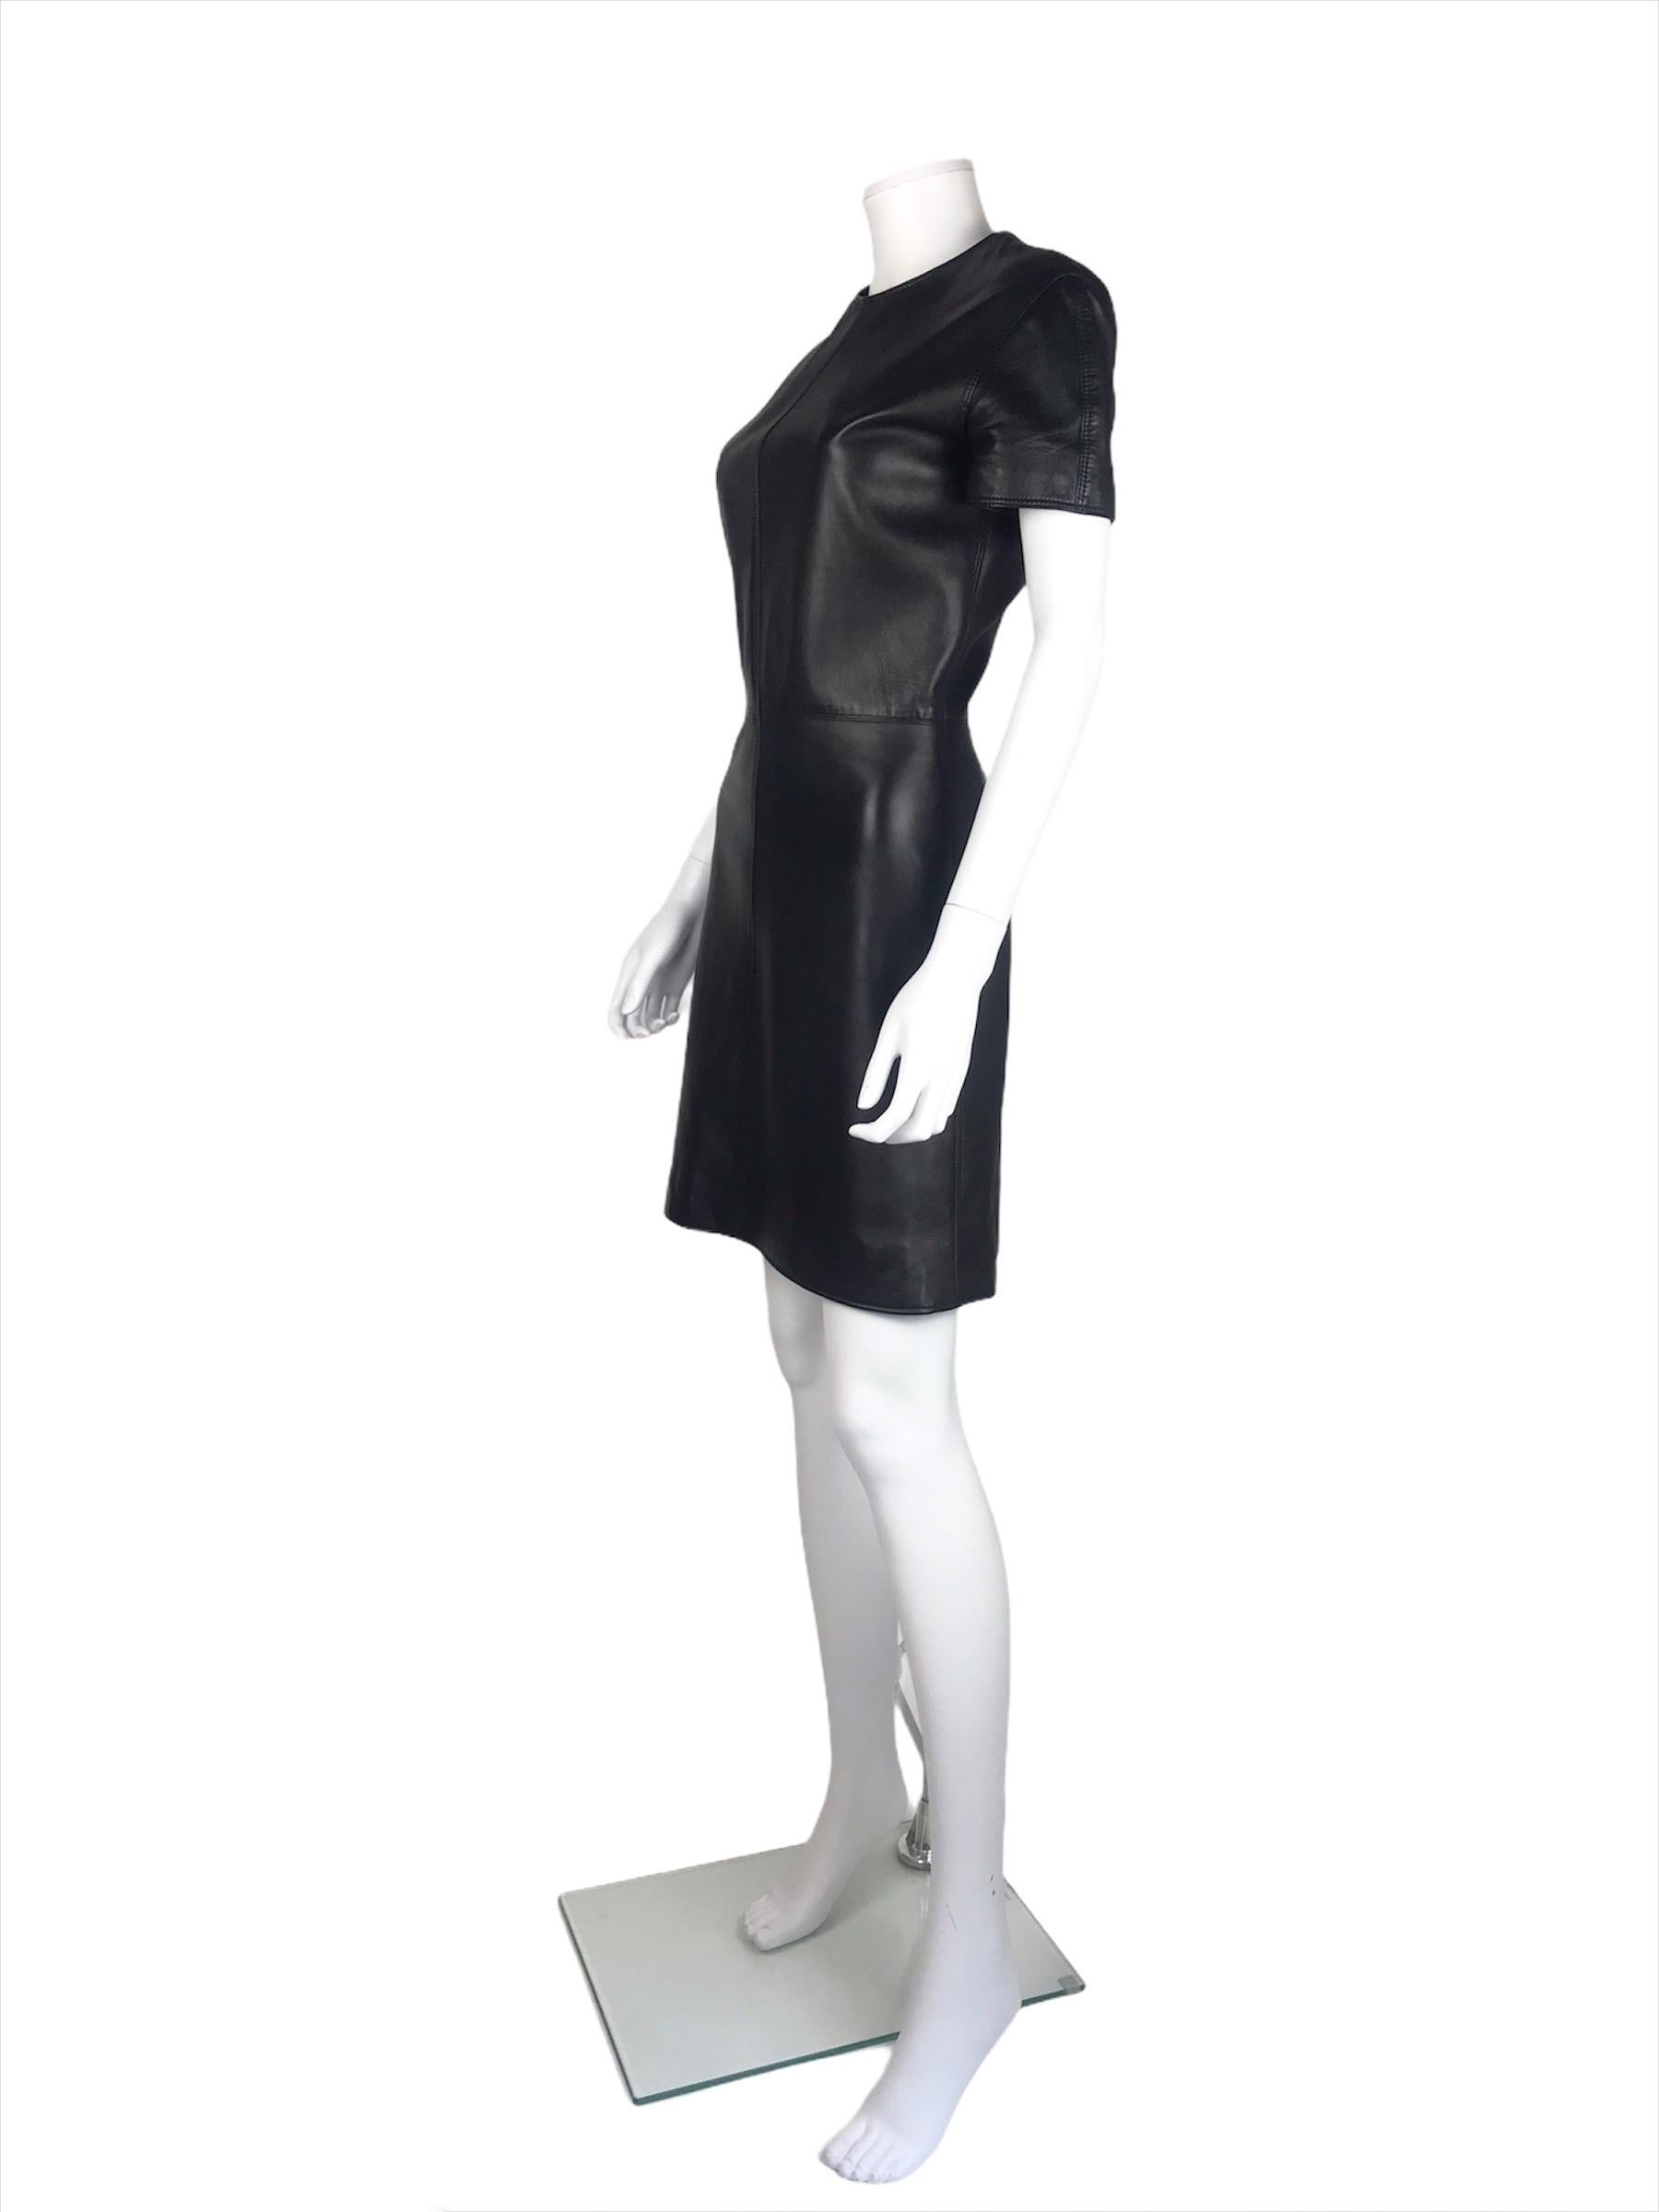 SS 1996 Gianni Versace Leather Dress Small / Shot by Richard Avedon  In Good Condition For Sale In Paris, FR